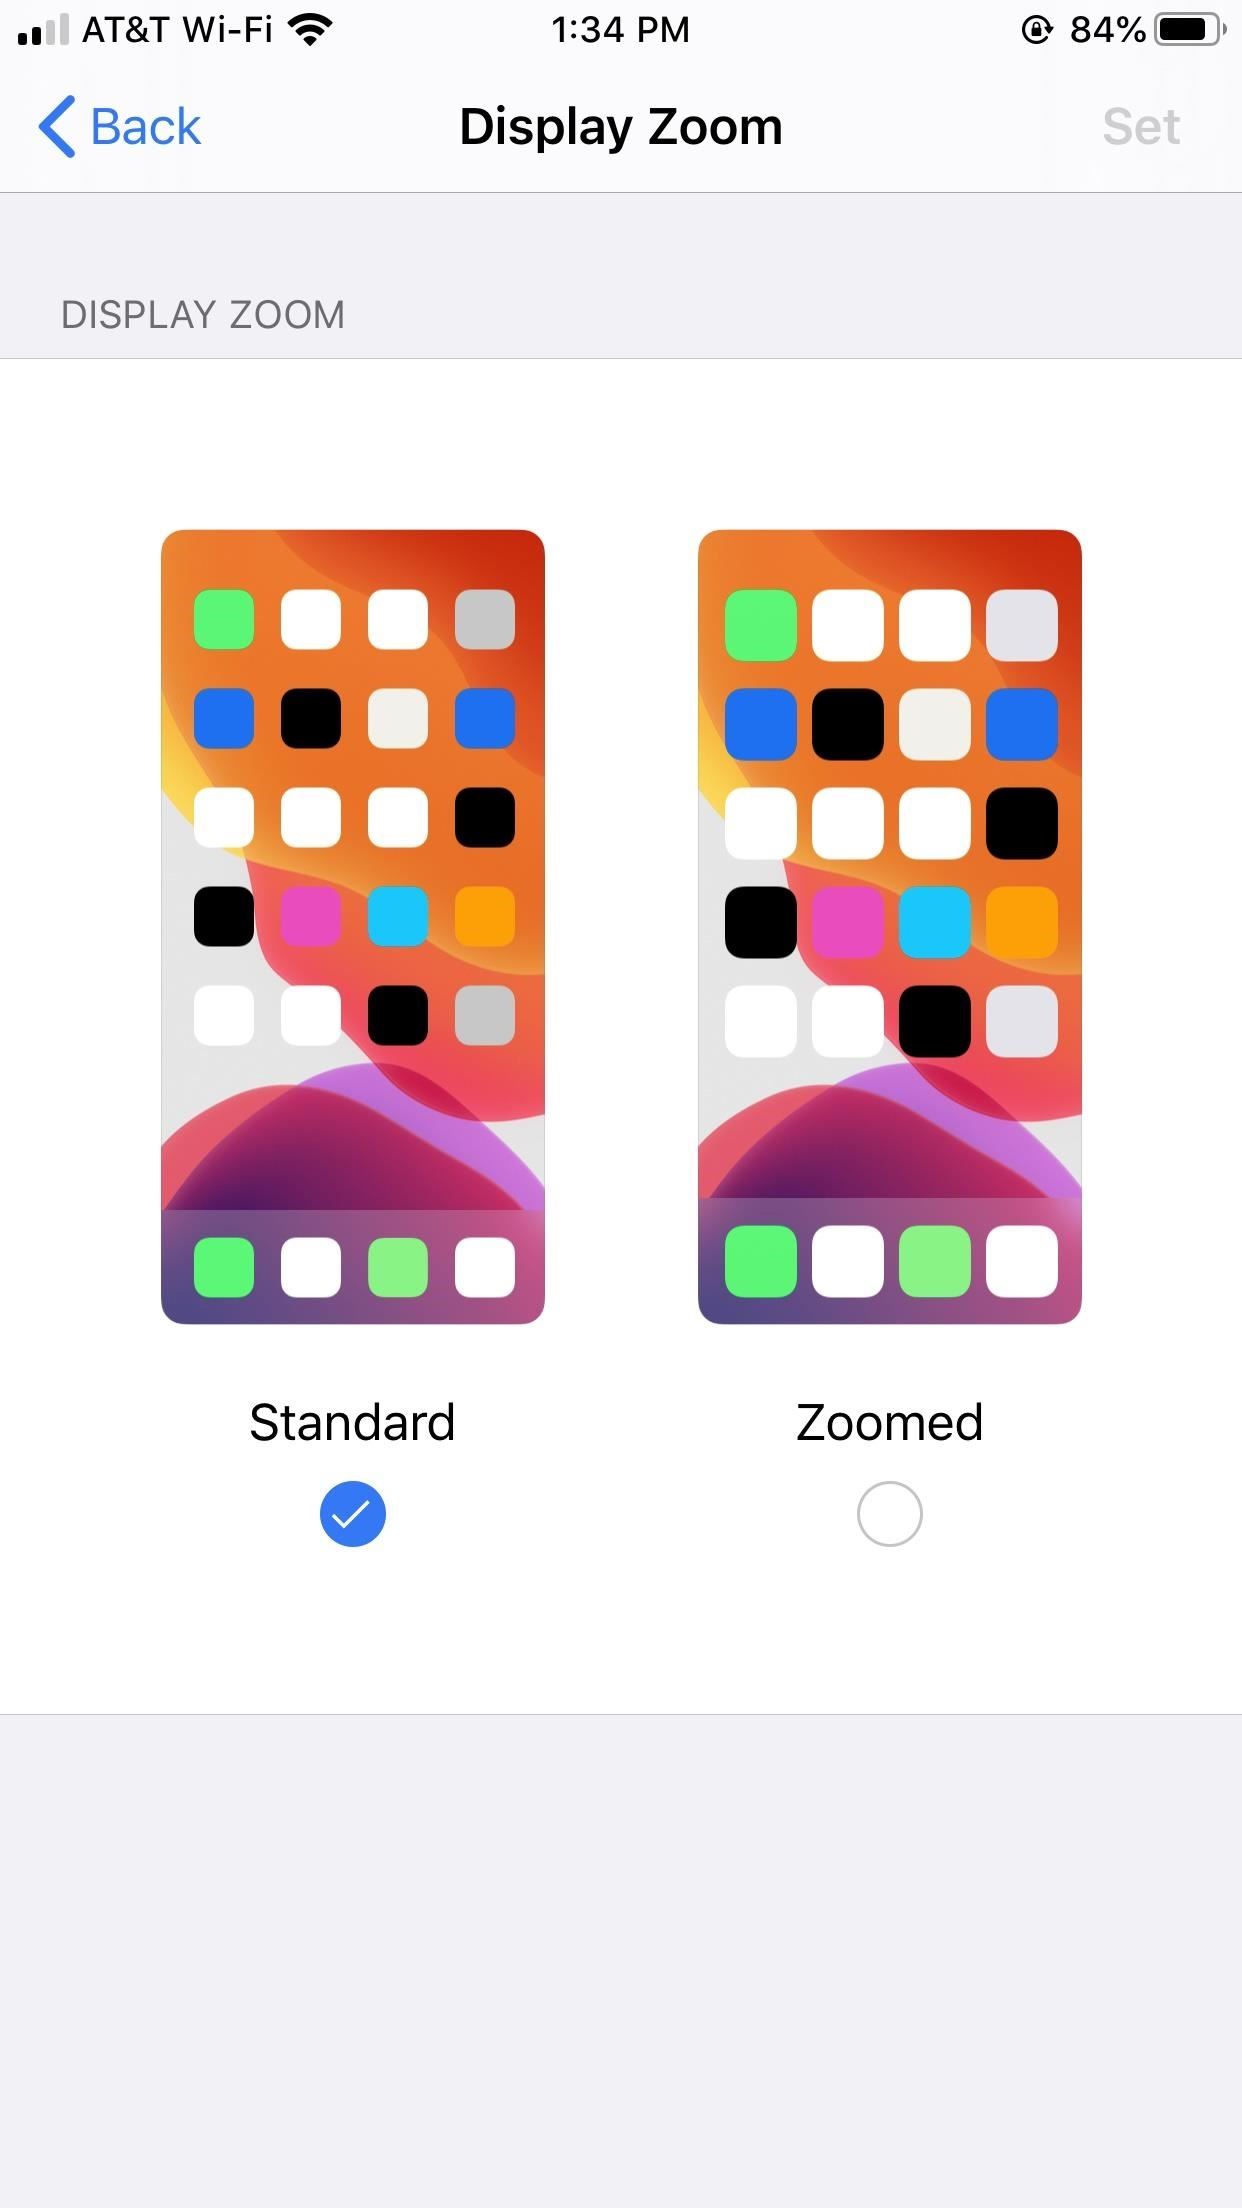 The Ultimate Guide to Customizing Your iPhone